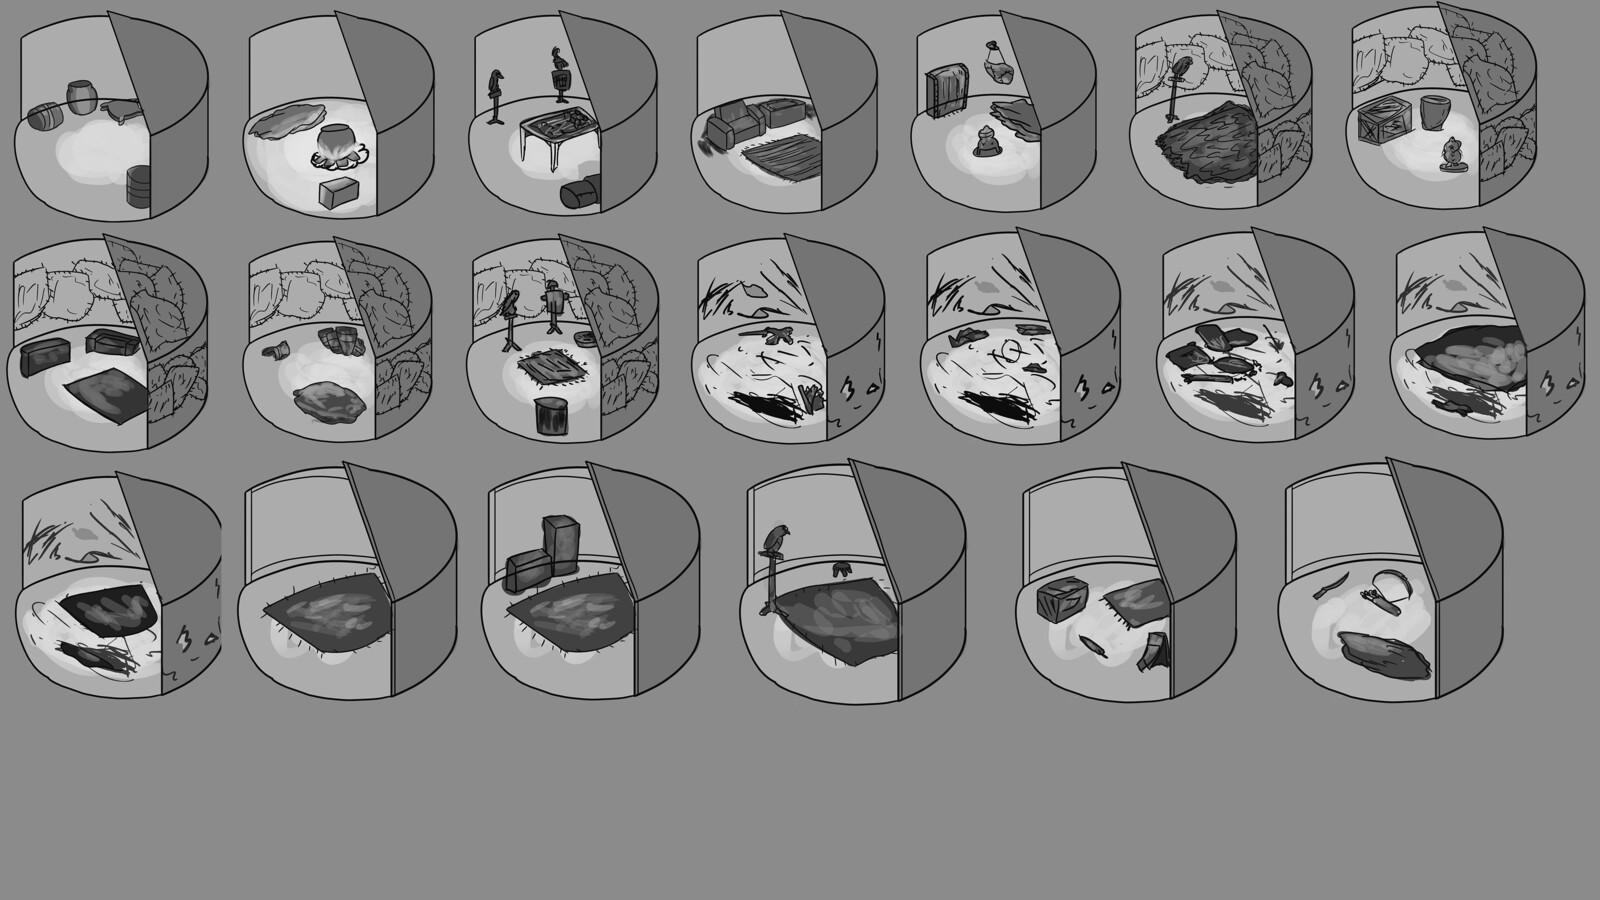 20 Thumbnails, each made quickly. I nearly ran out of time when I finished all of them.